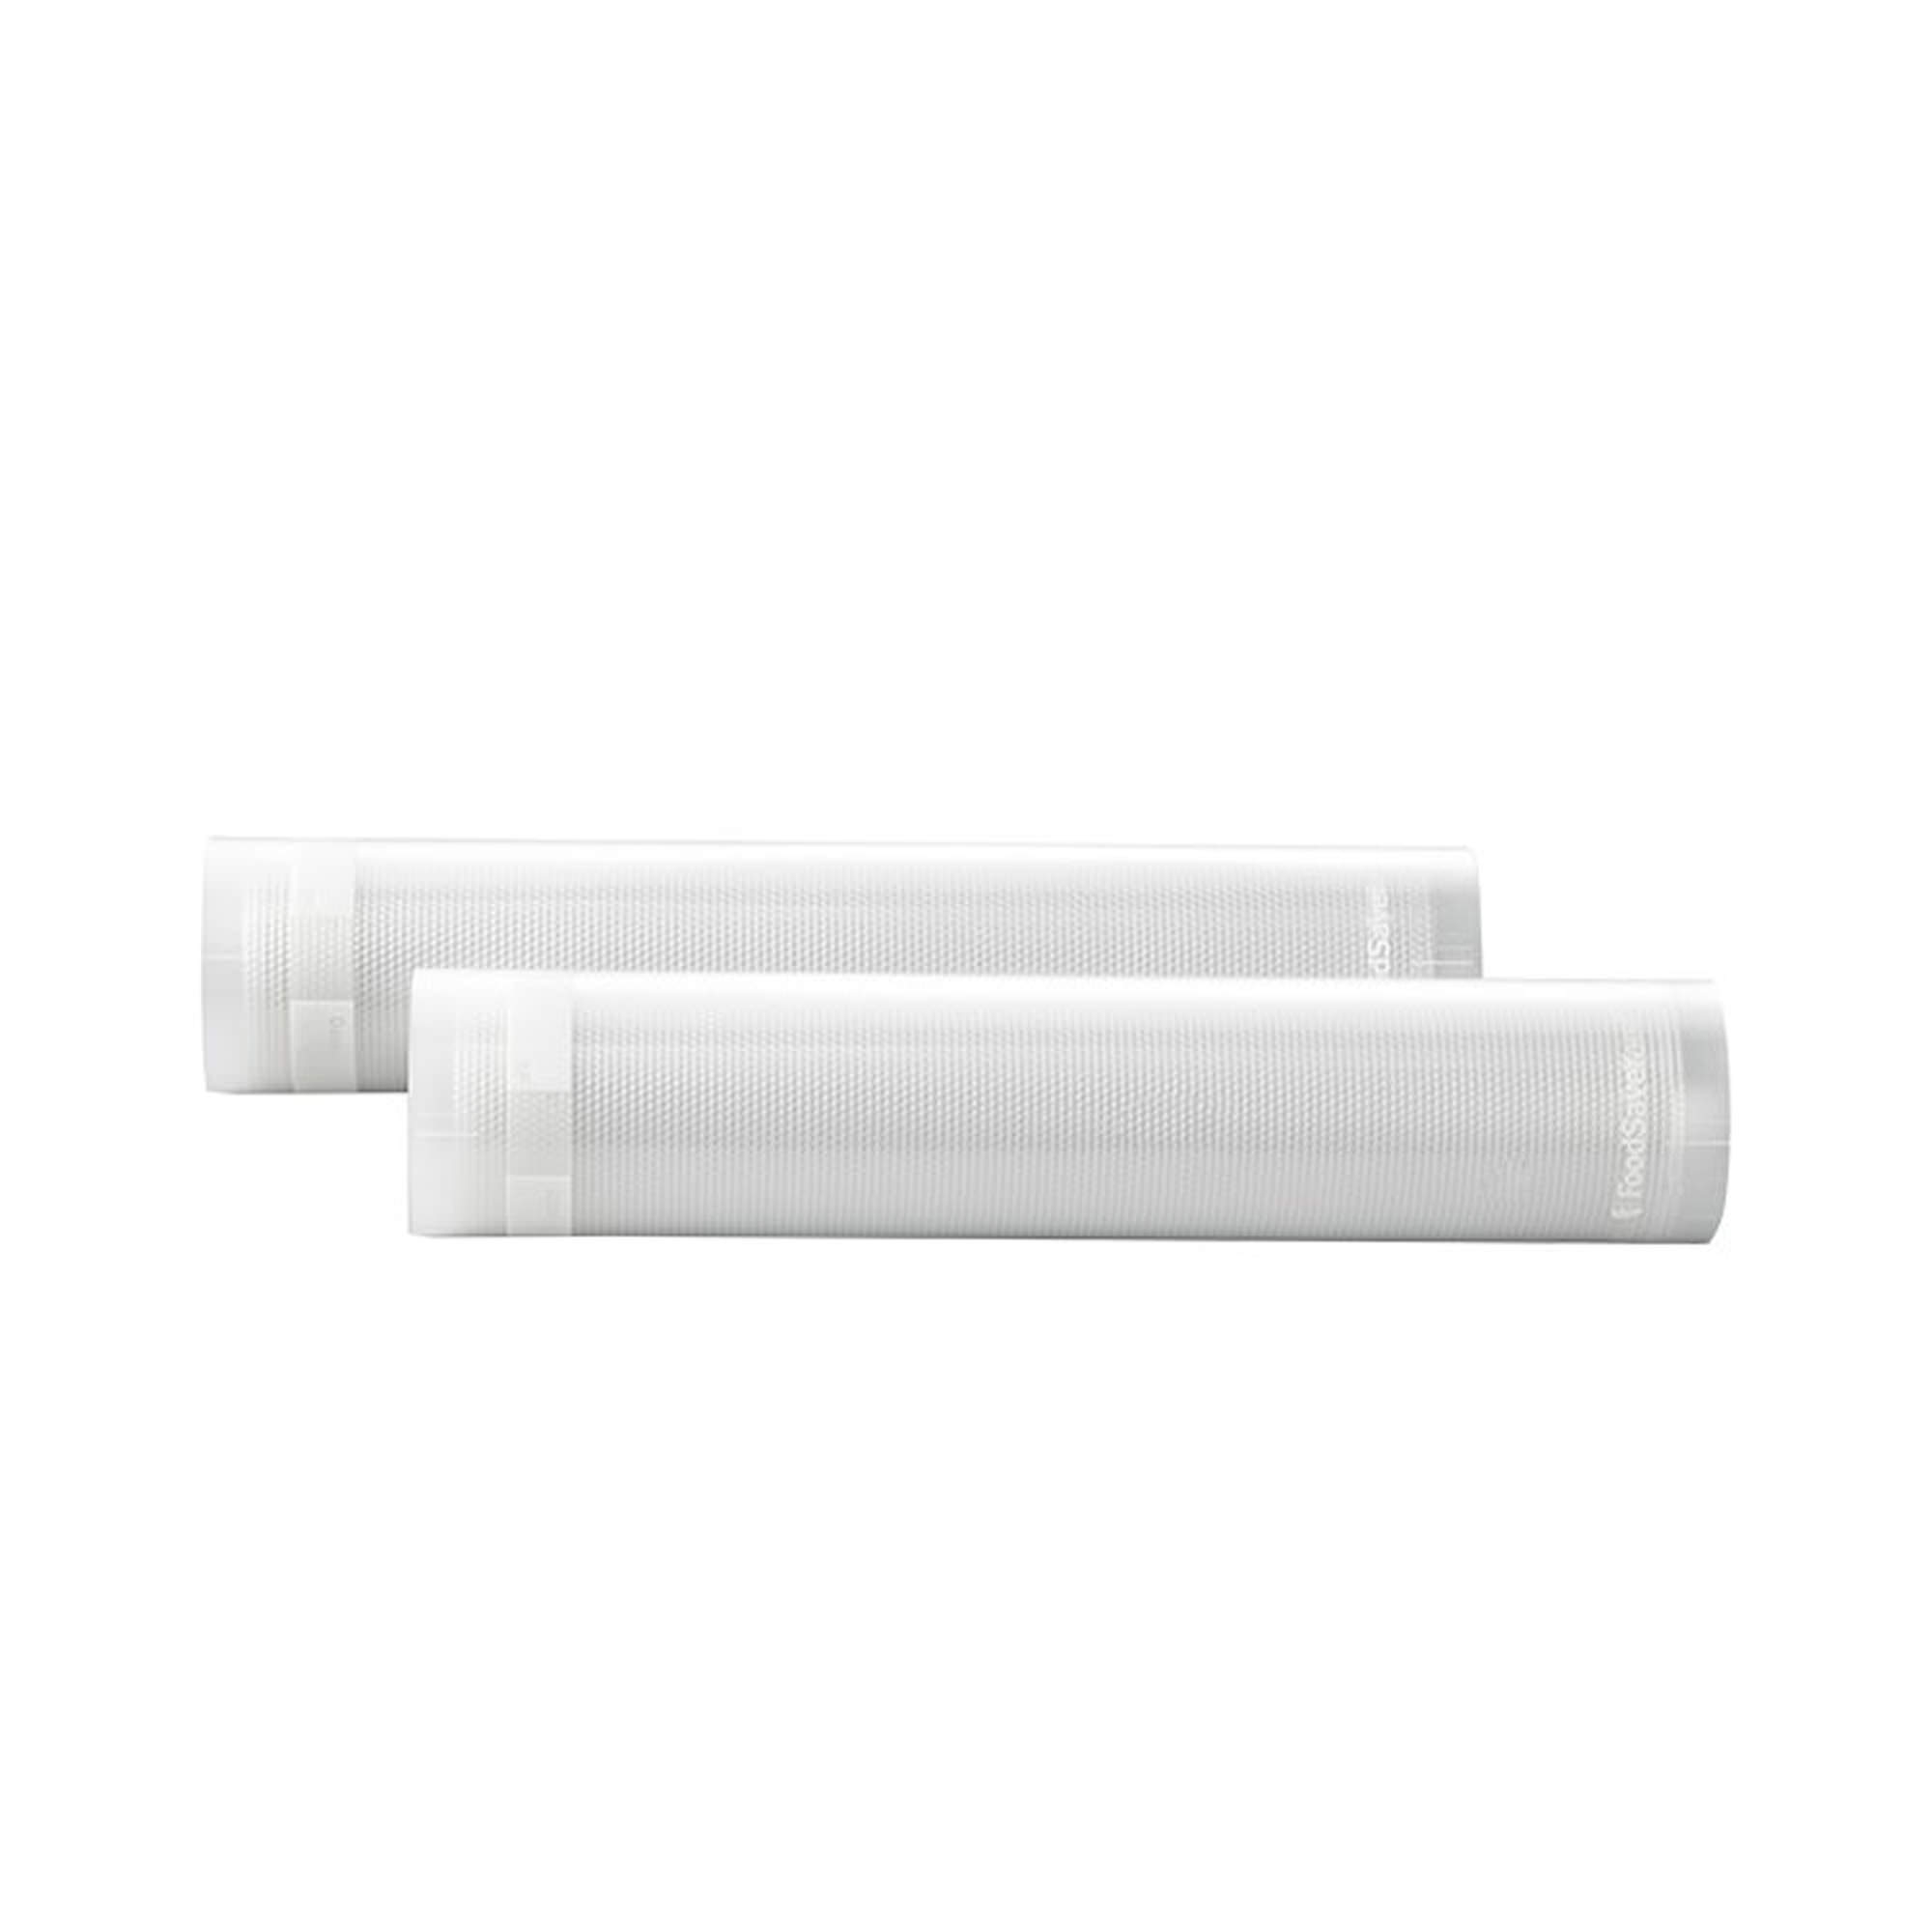 FoodSaver Double Roll 20cm x 6.7m Image 1